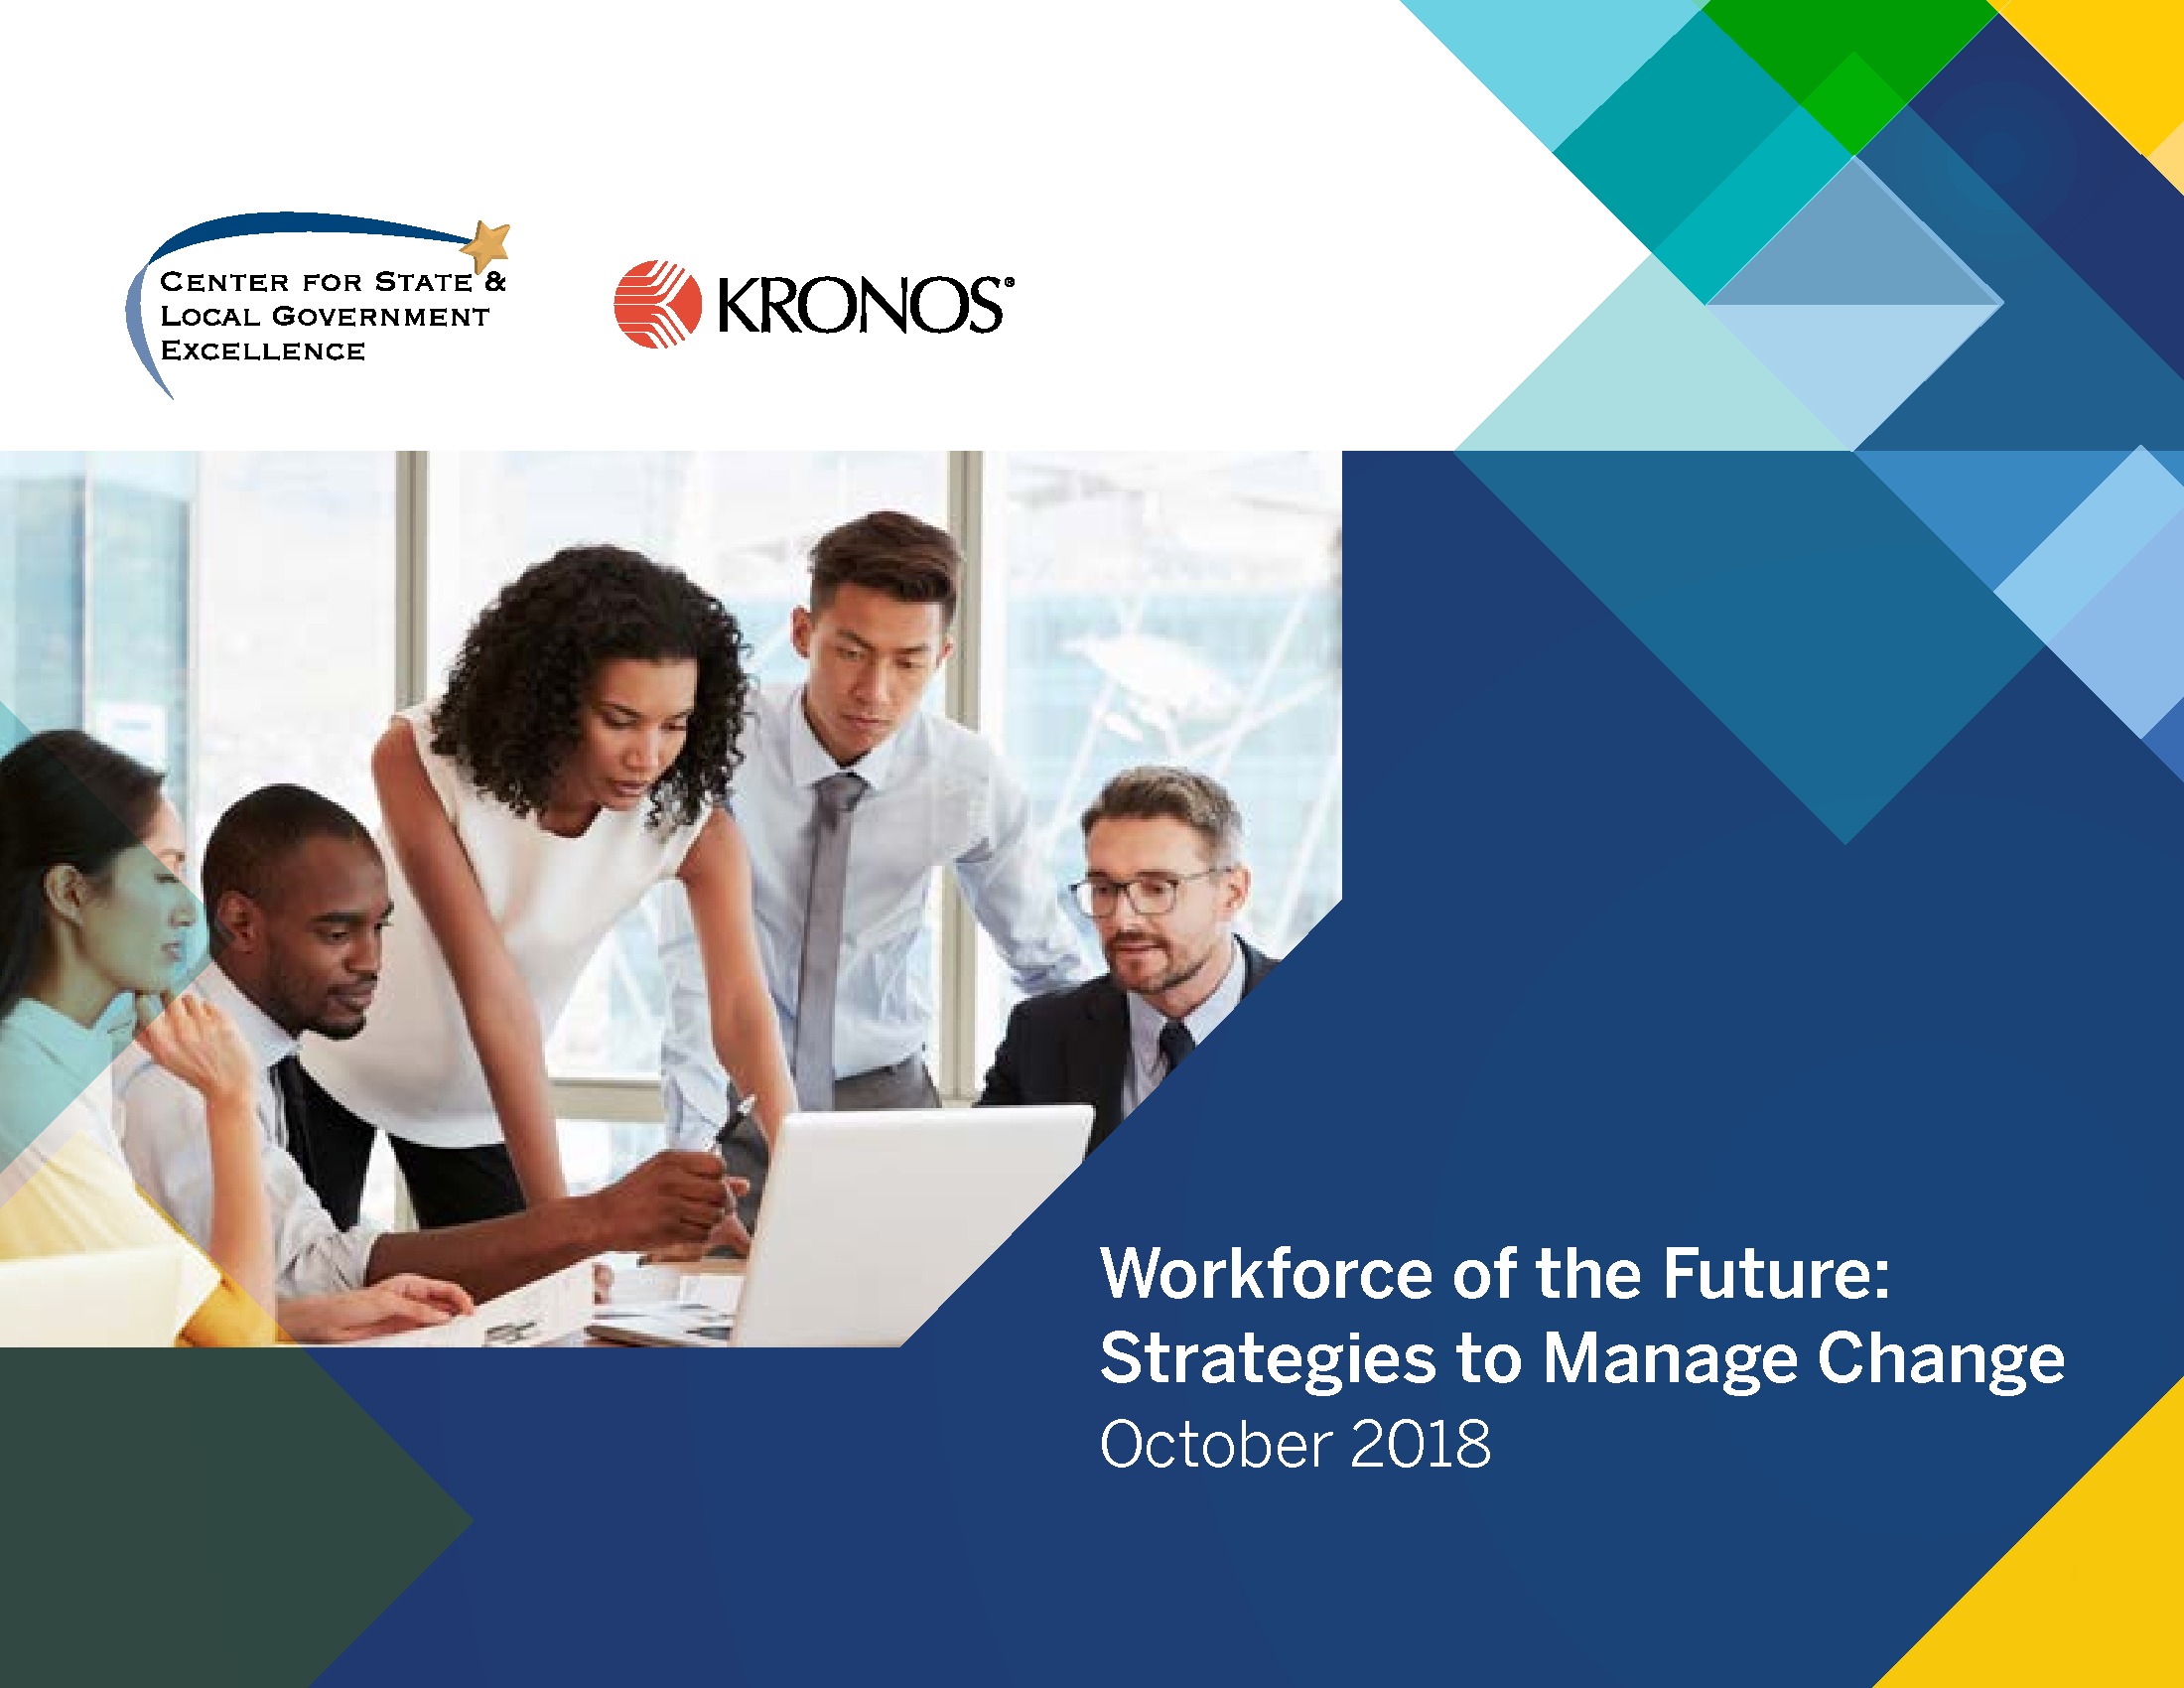 Workforce of the Future: Strategies to Manage Change